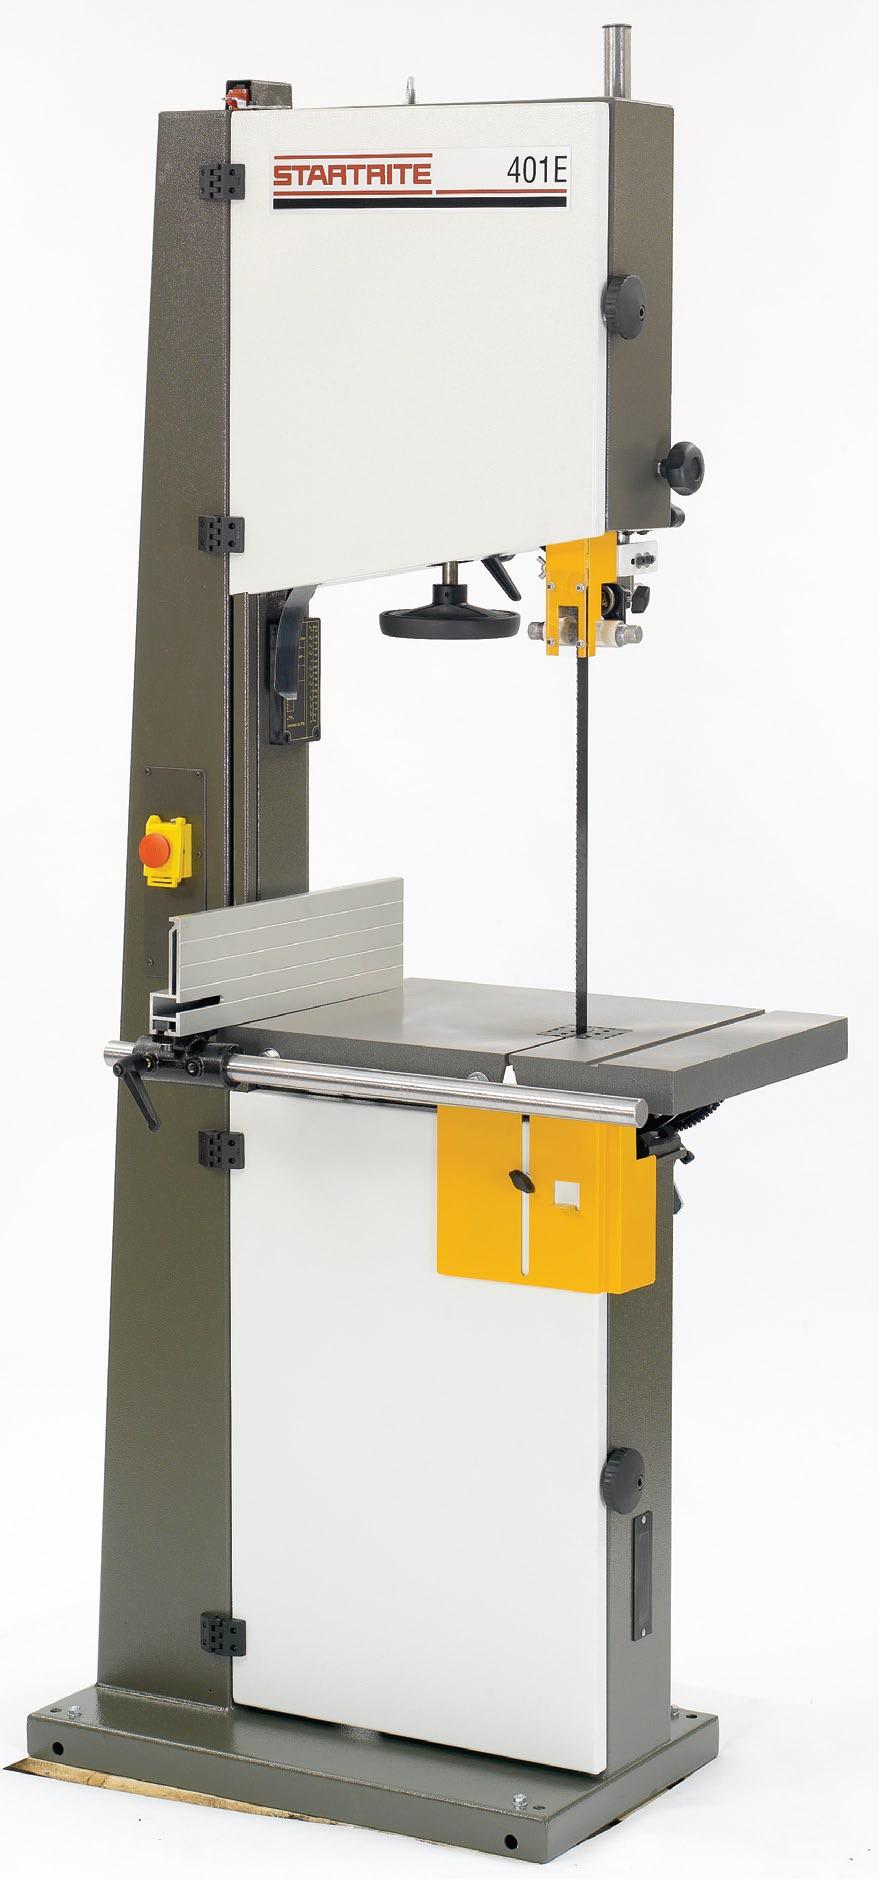 401E & 401S Industrial Bandsaws The 400 series has now been extended to include a more economical version of the 401S and all of the machines have had their capacity increased to the class leading